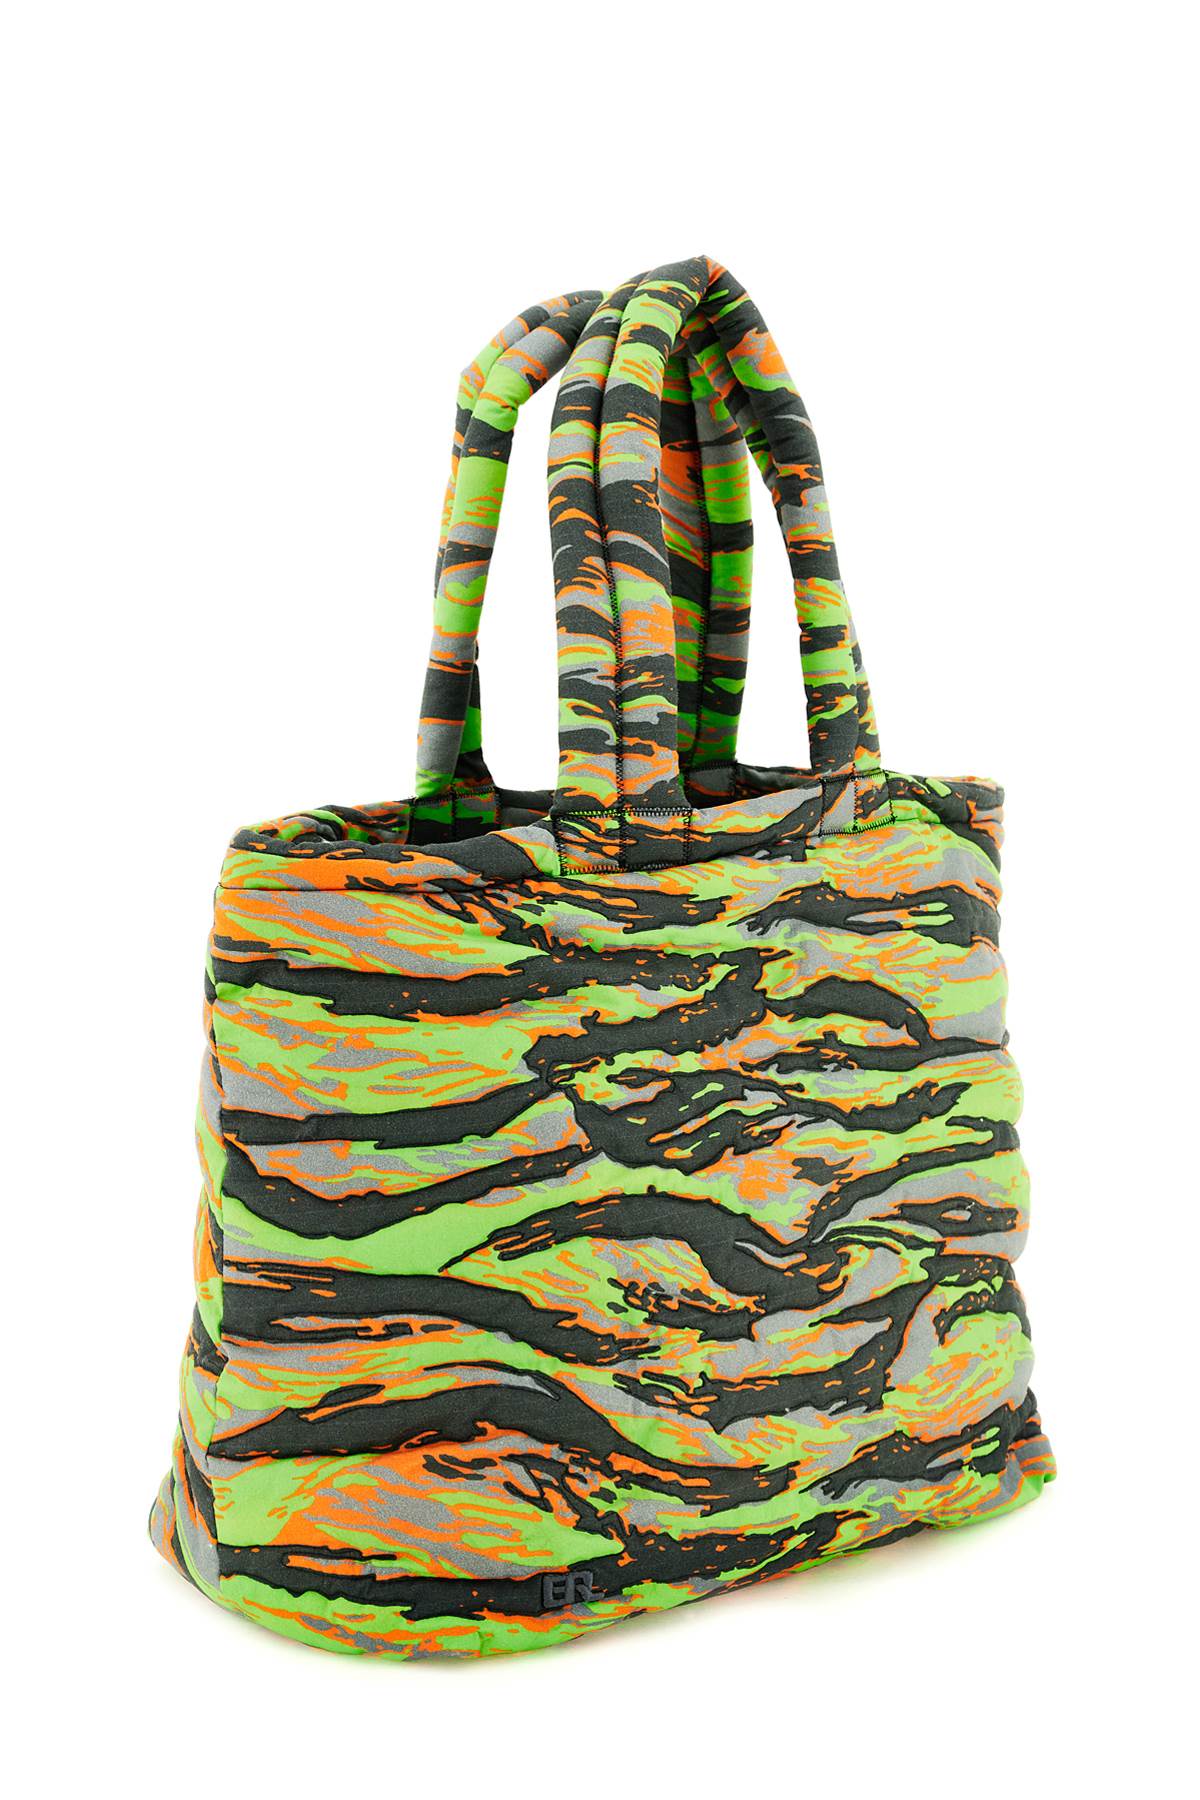 Erl camouflage puffer bag-2